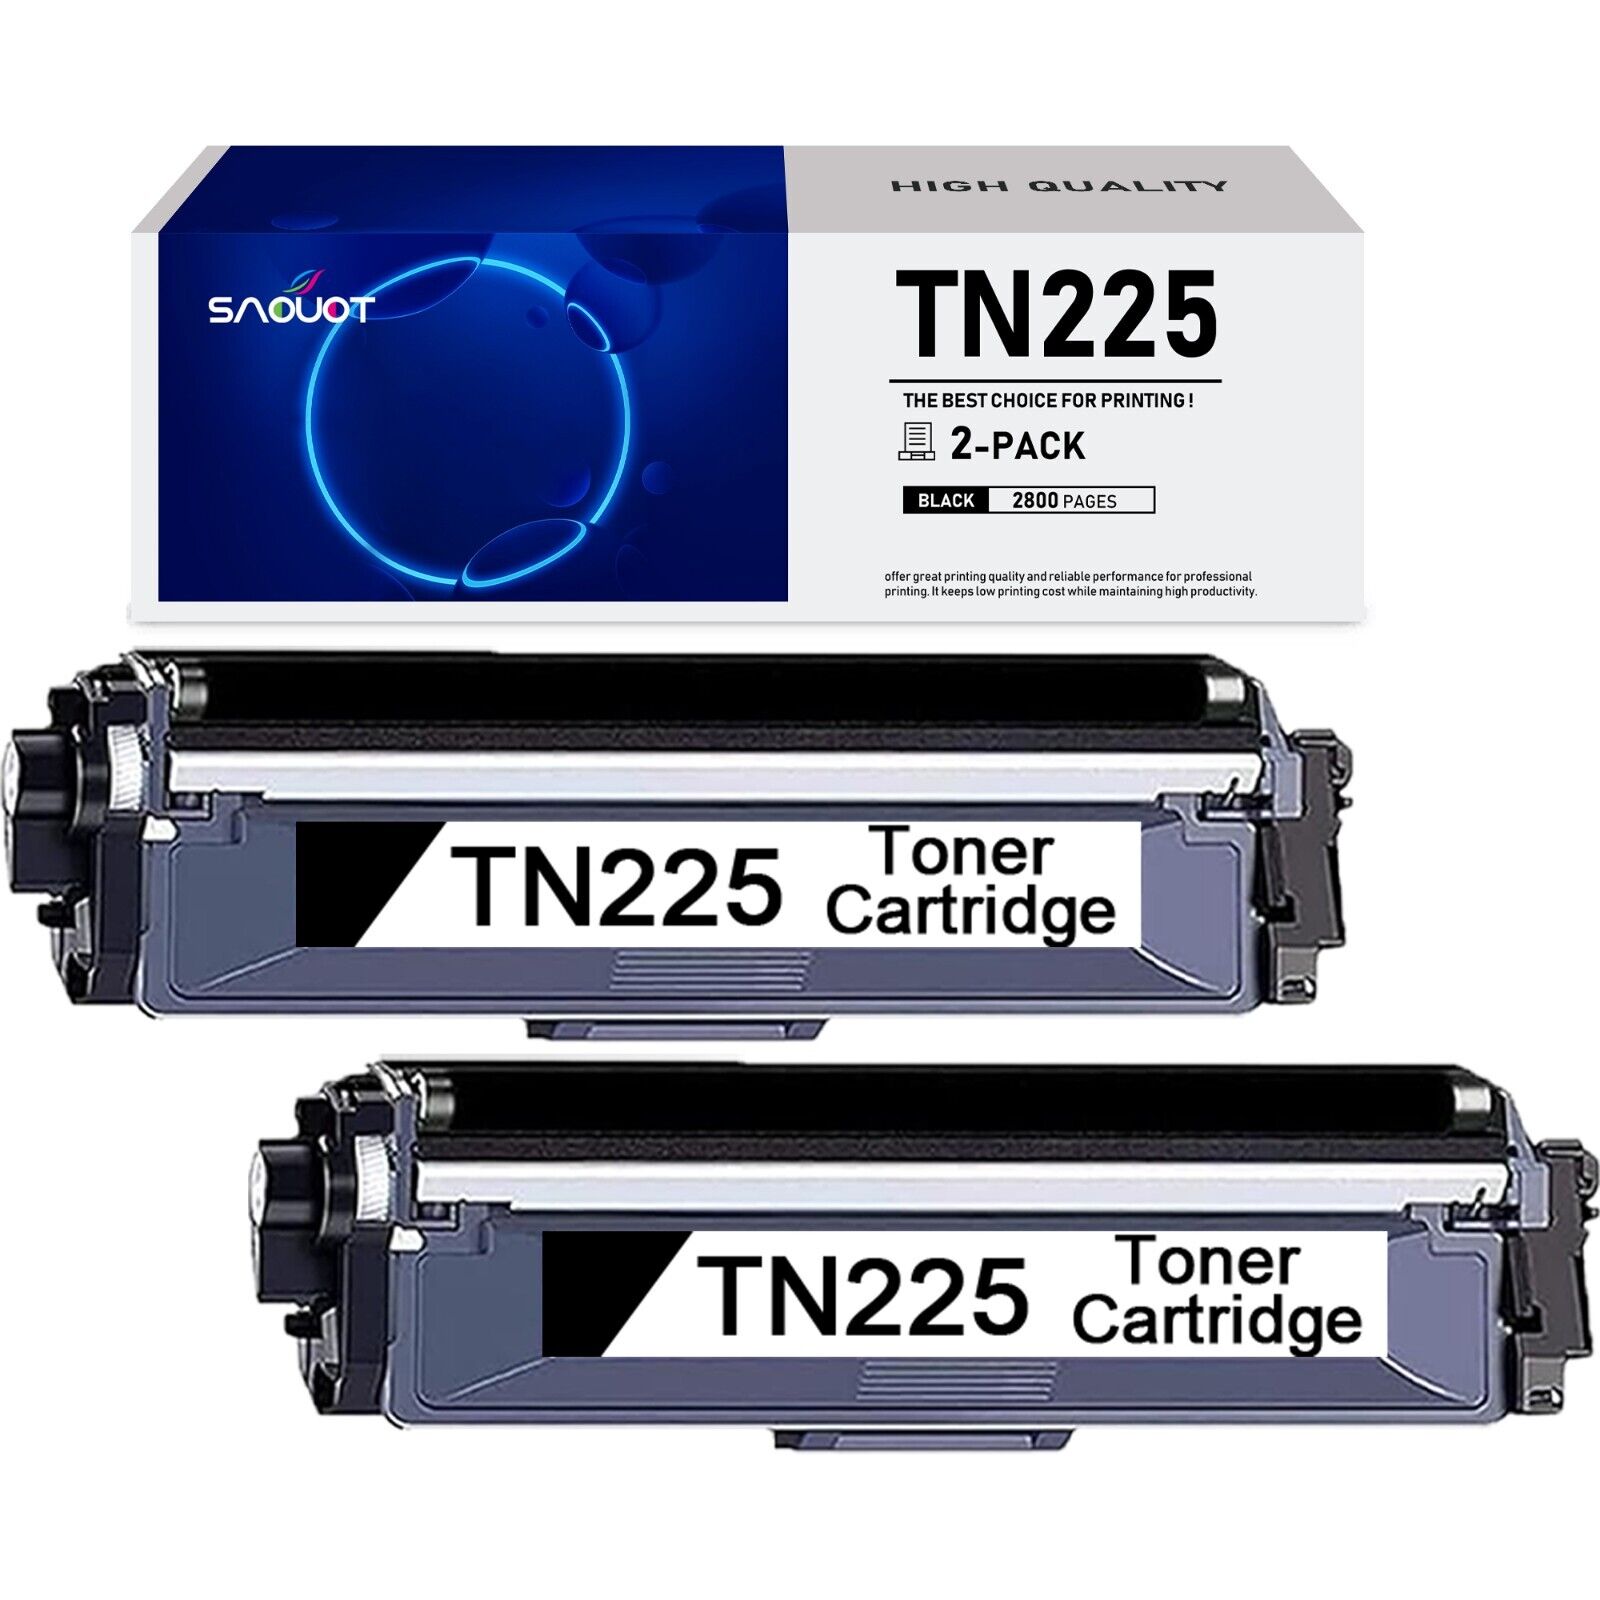 TN225 Toner Cartridge Replacement for Brother MFC-9130CW HL-3170CDW 3180CDW